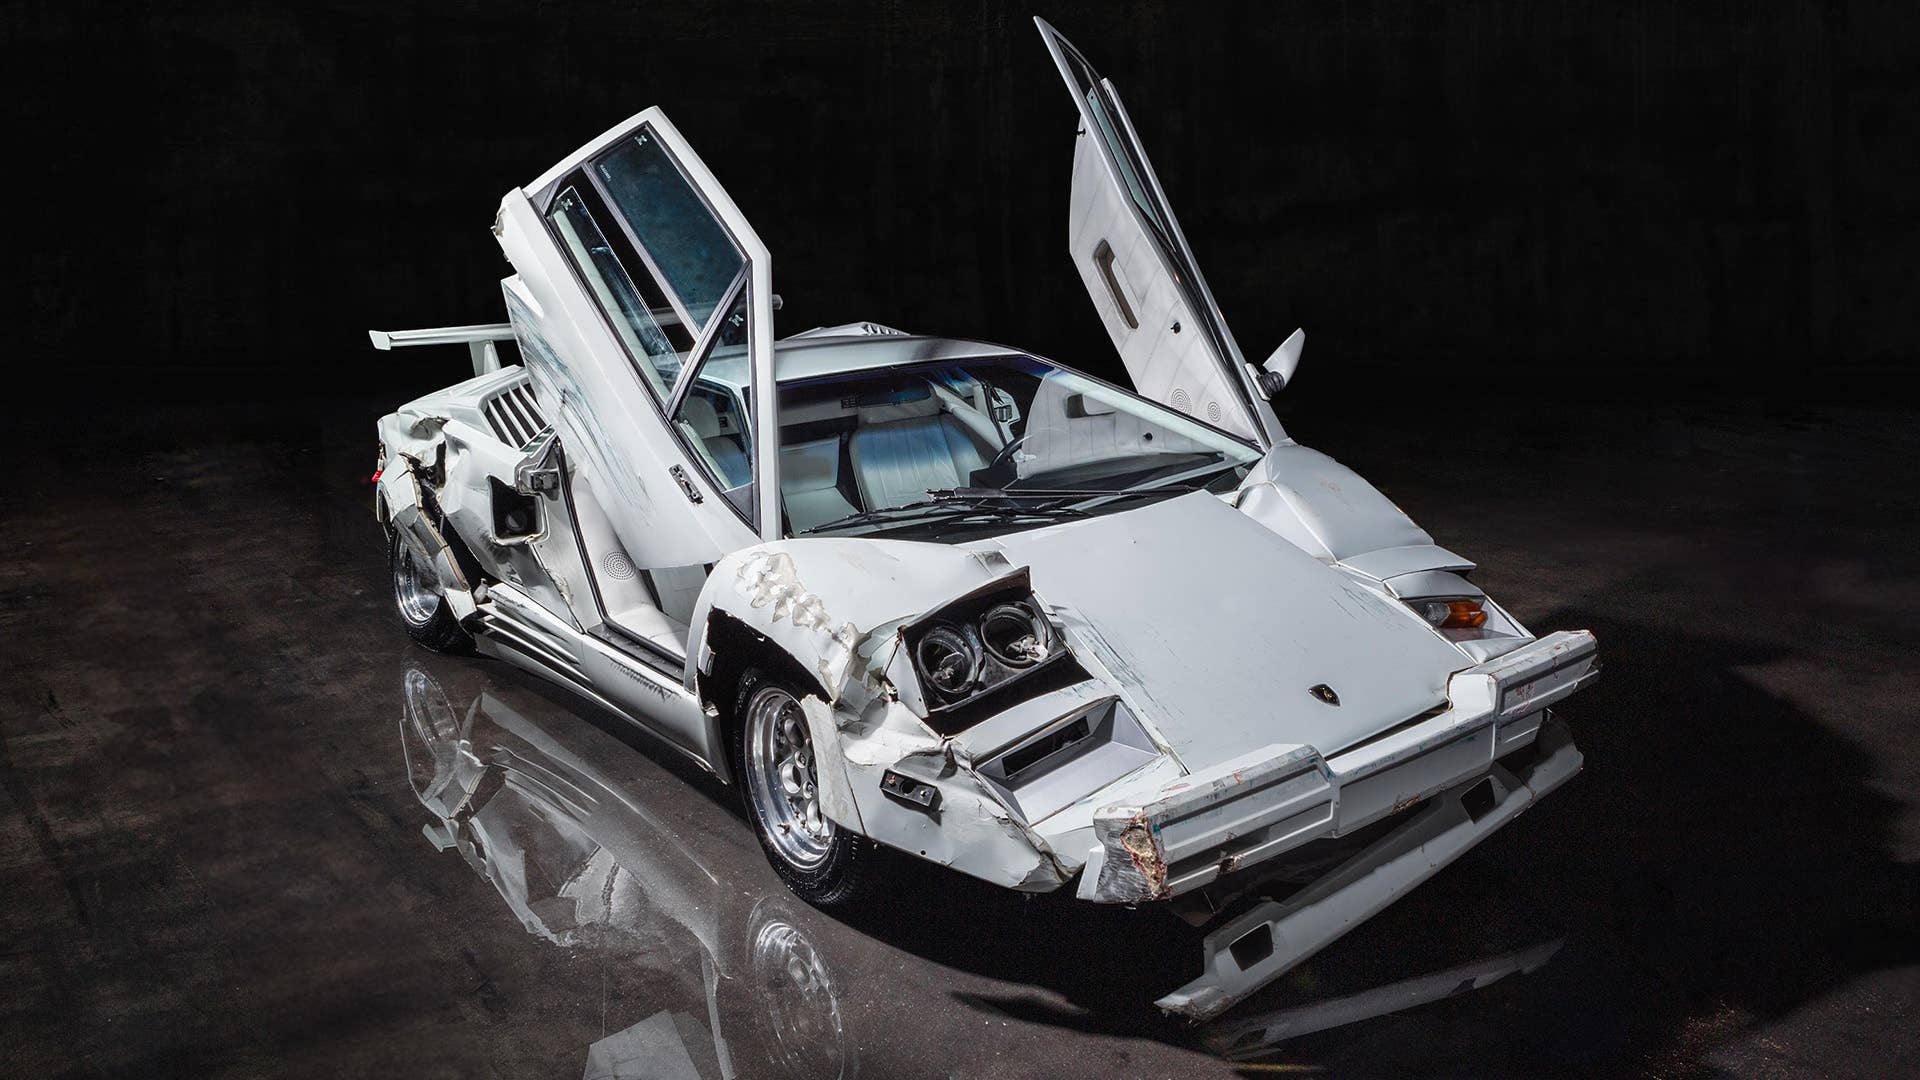 The Real Wrecked Lamborghini Countach From Wolf of Wall Street Is For Sale